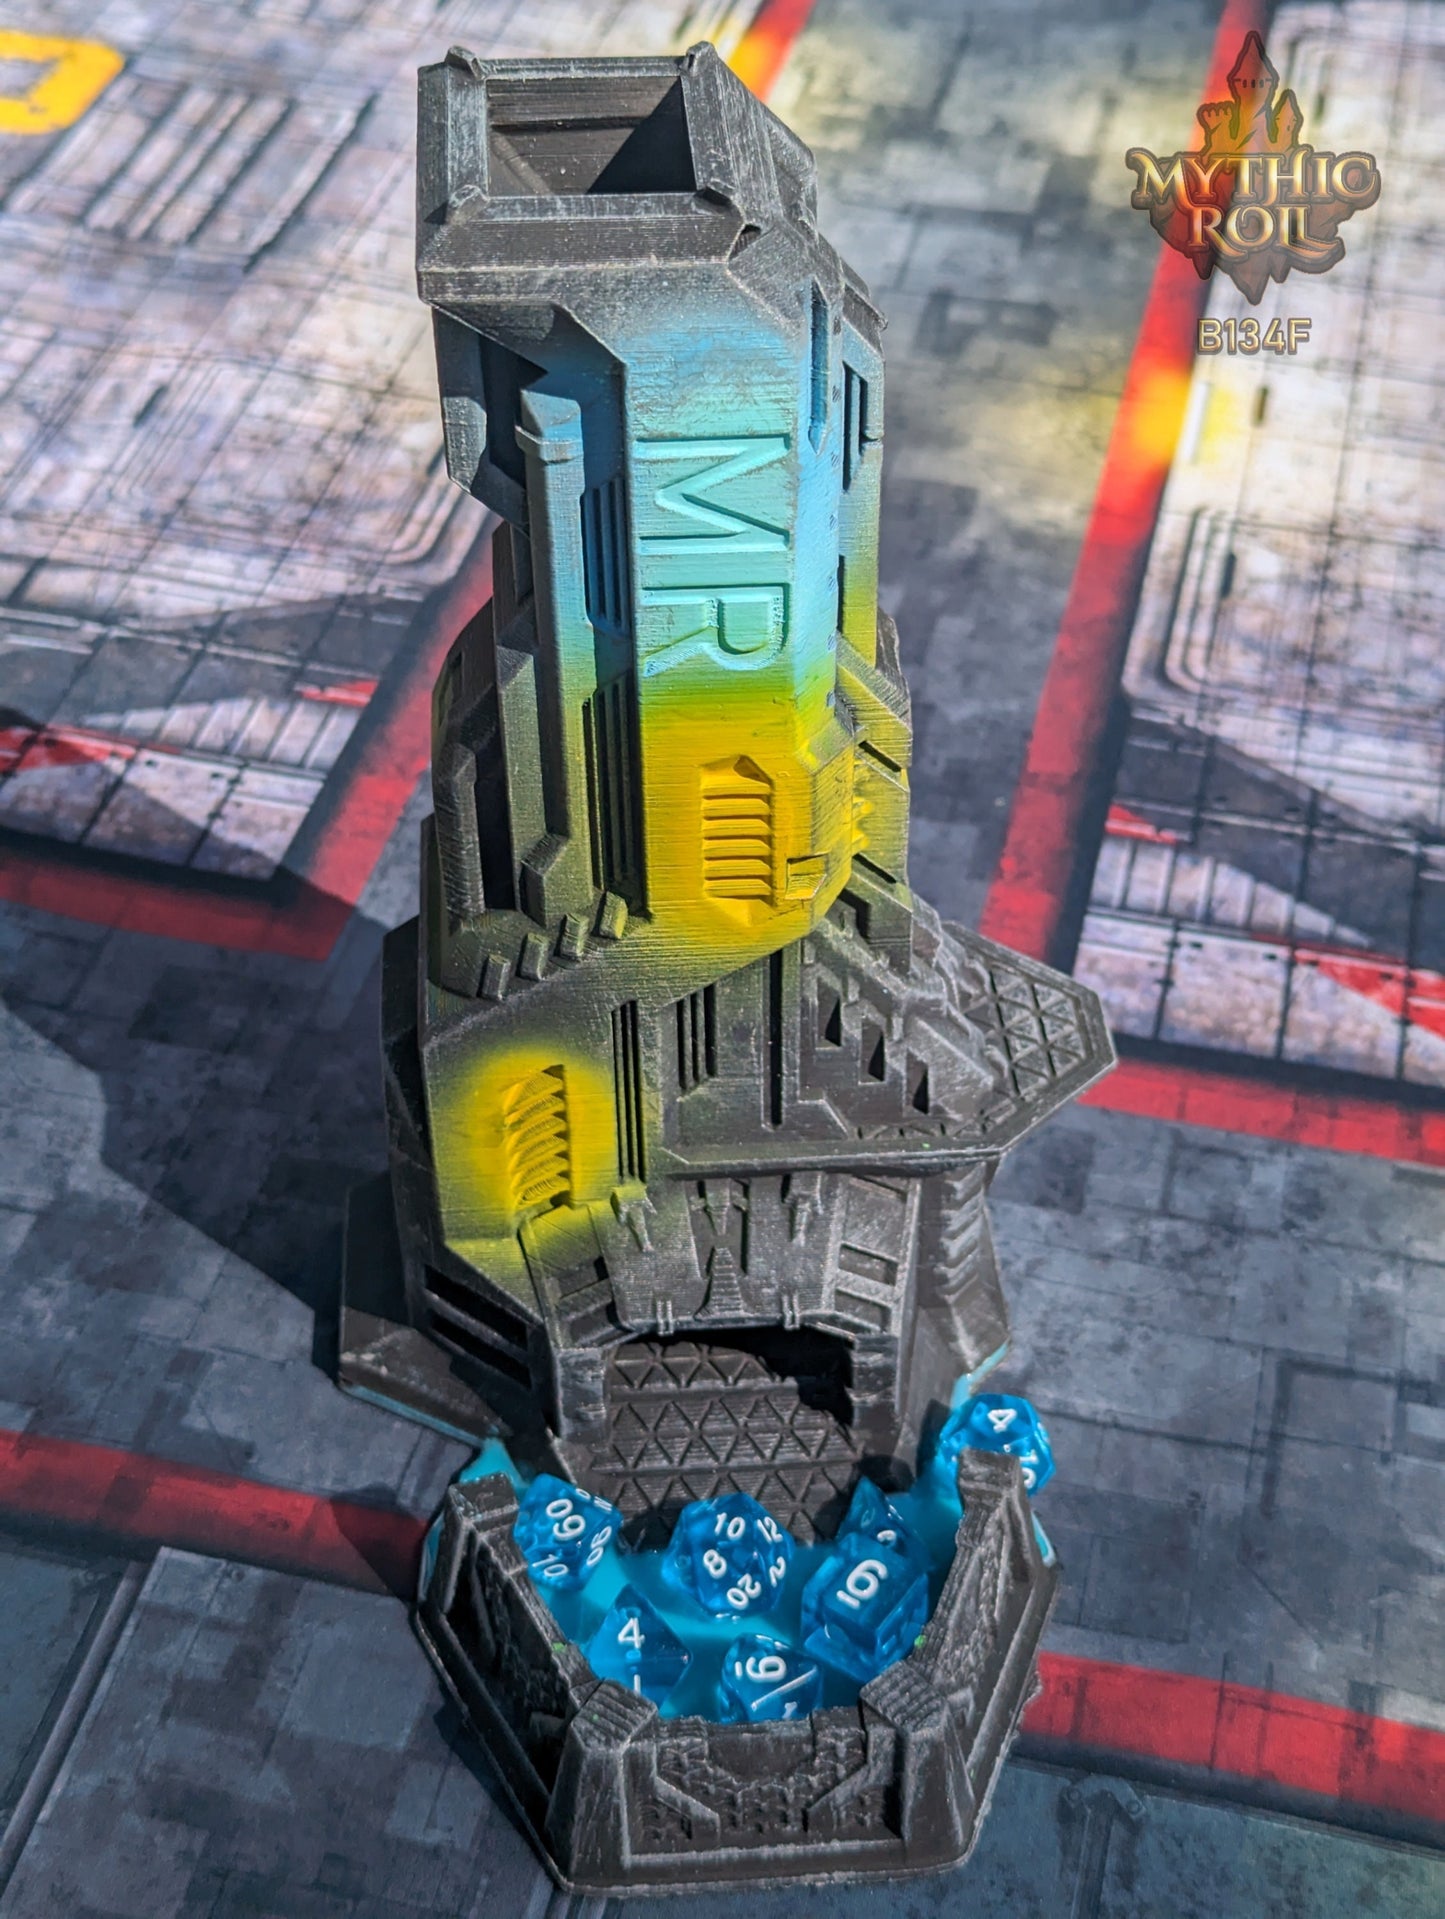 Cyberpunk-Control SciFi Dice Tower by Unchained Games - Mythic Roll Collection - Delve into Digital Domains & Future Realms with Each Toss.